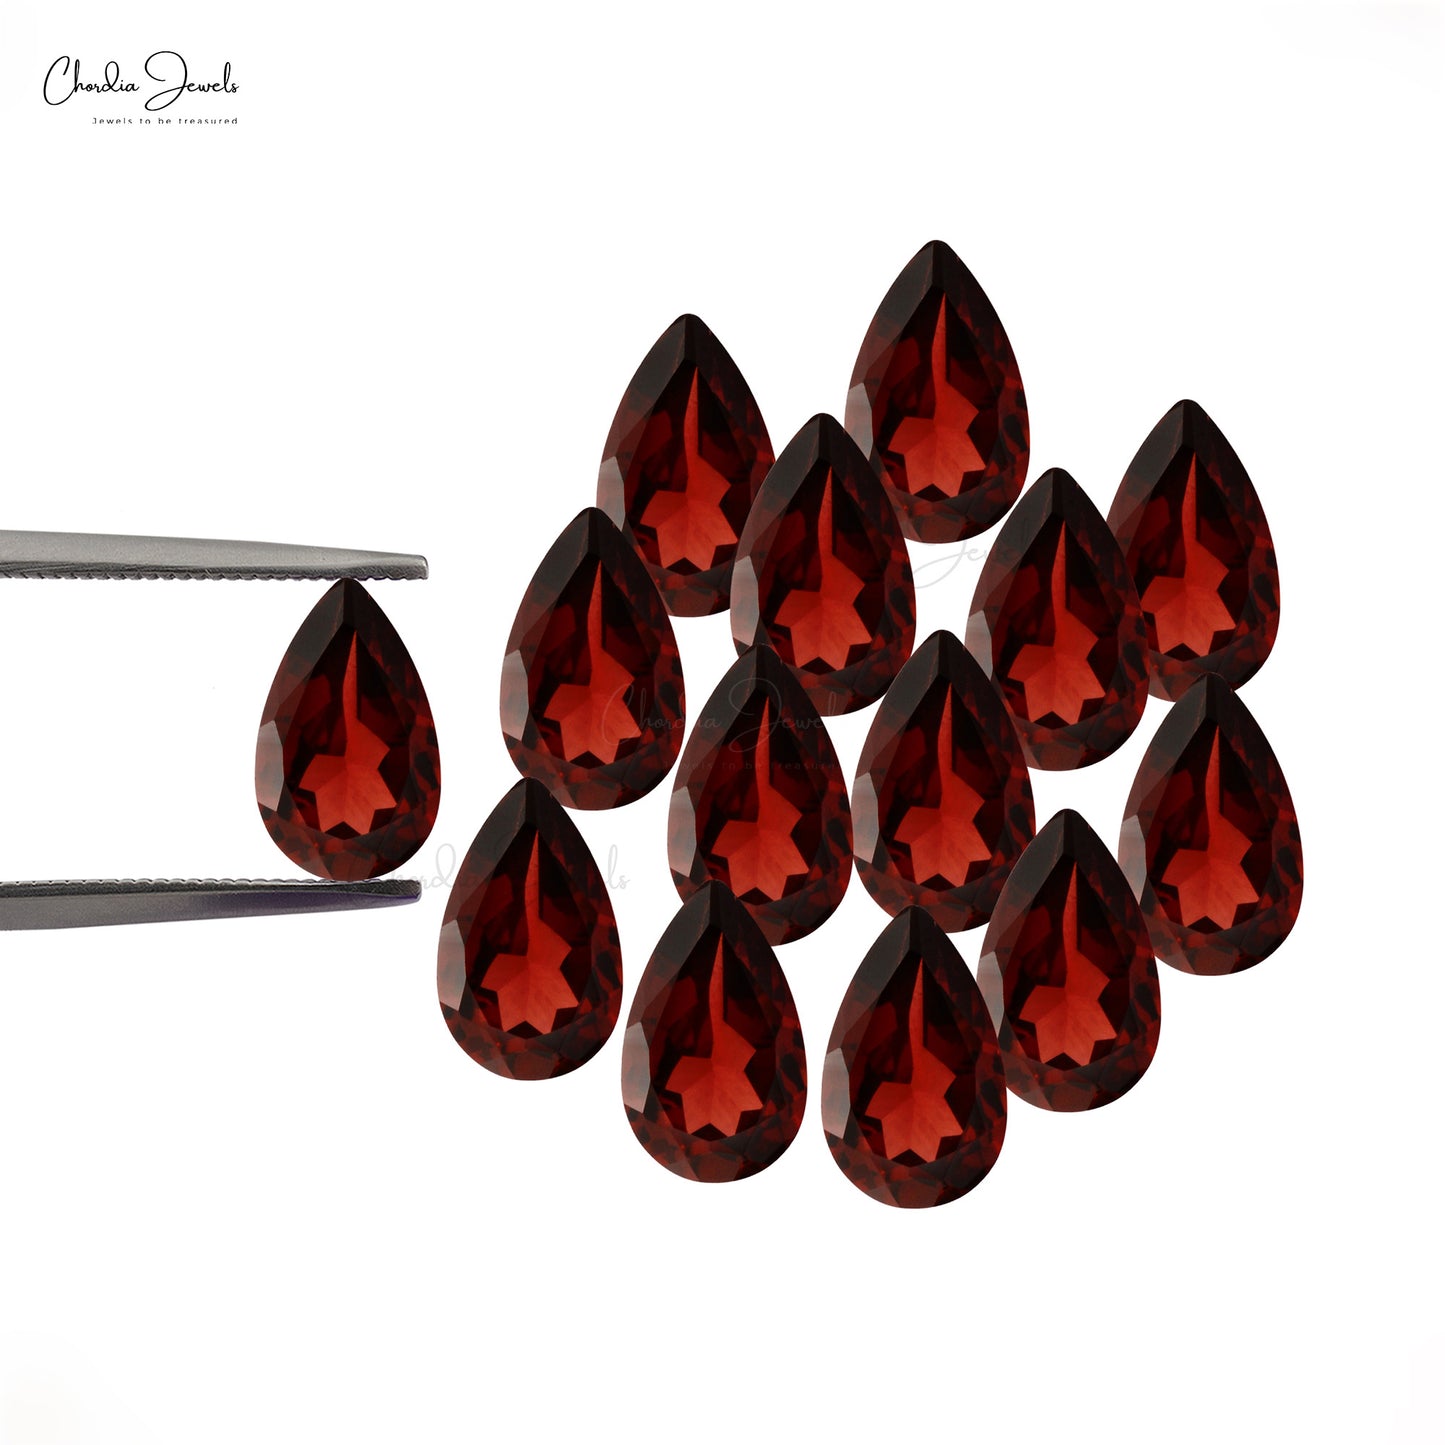 Load image into Gallery viewer, High Grade Mozambique Garnet 10X7MM Loose Faceted Gemstone for Rings, 1 Piece
